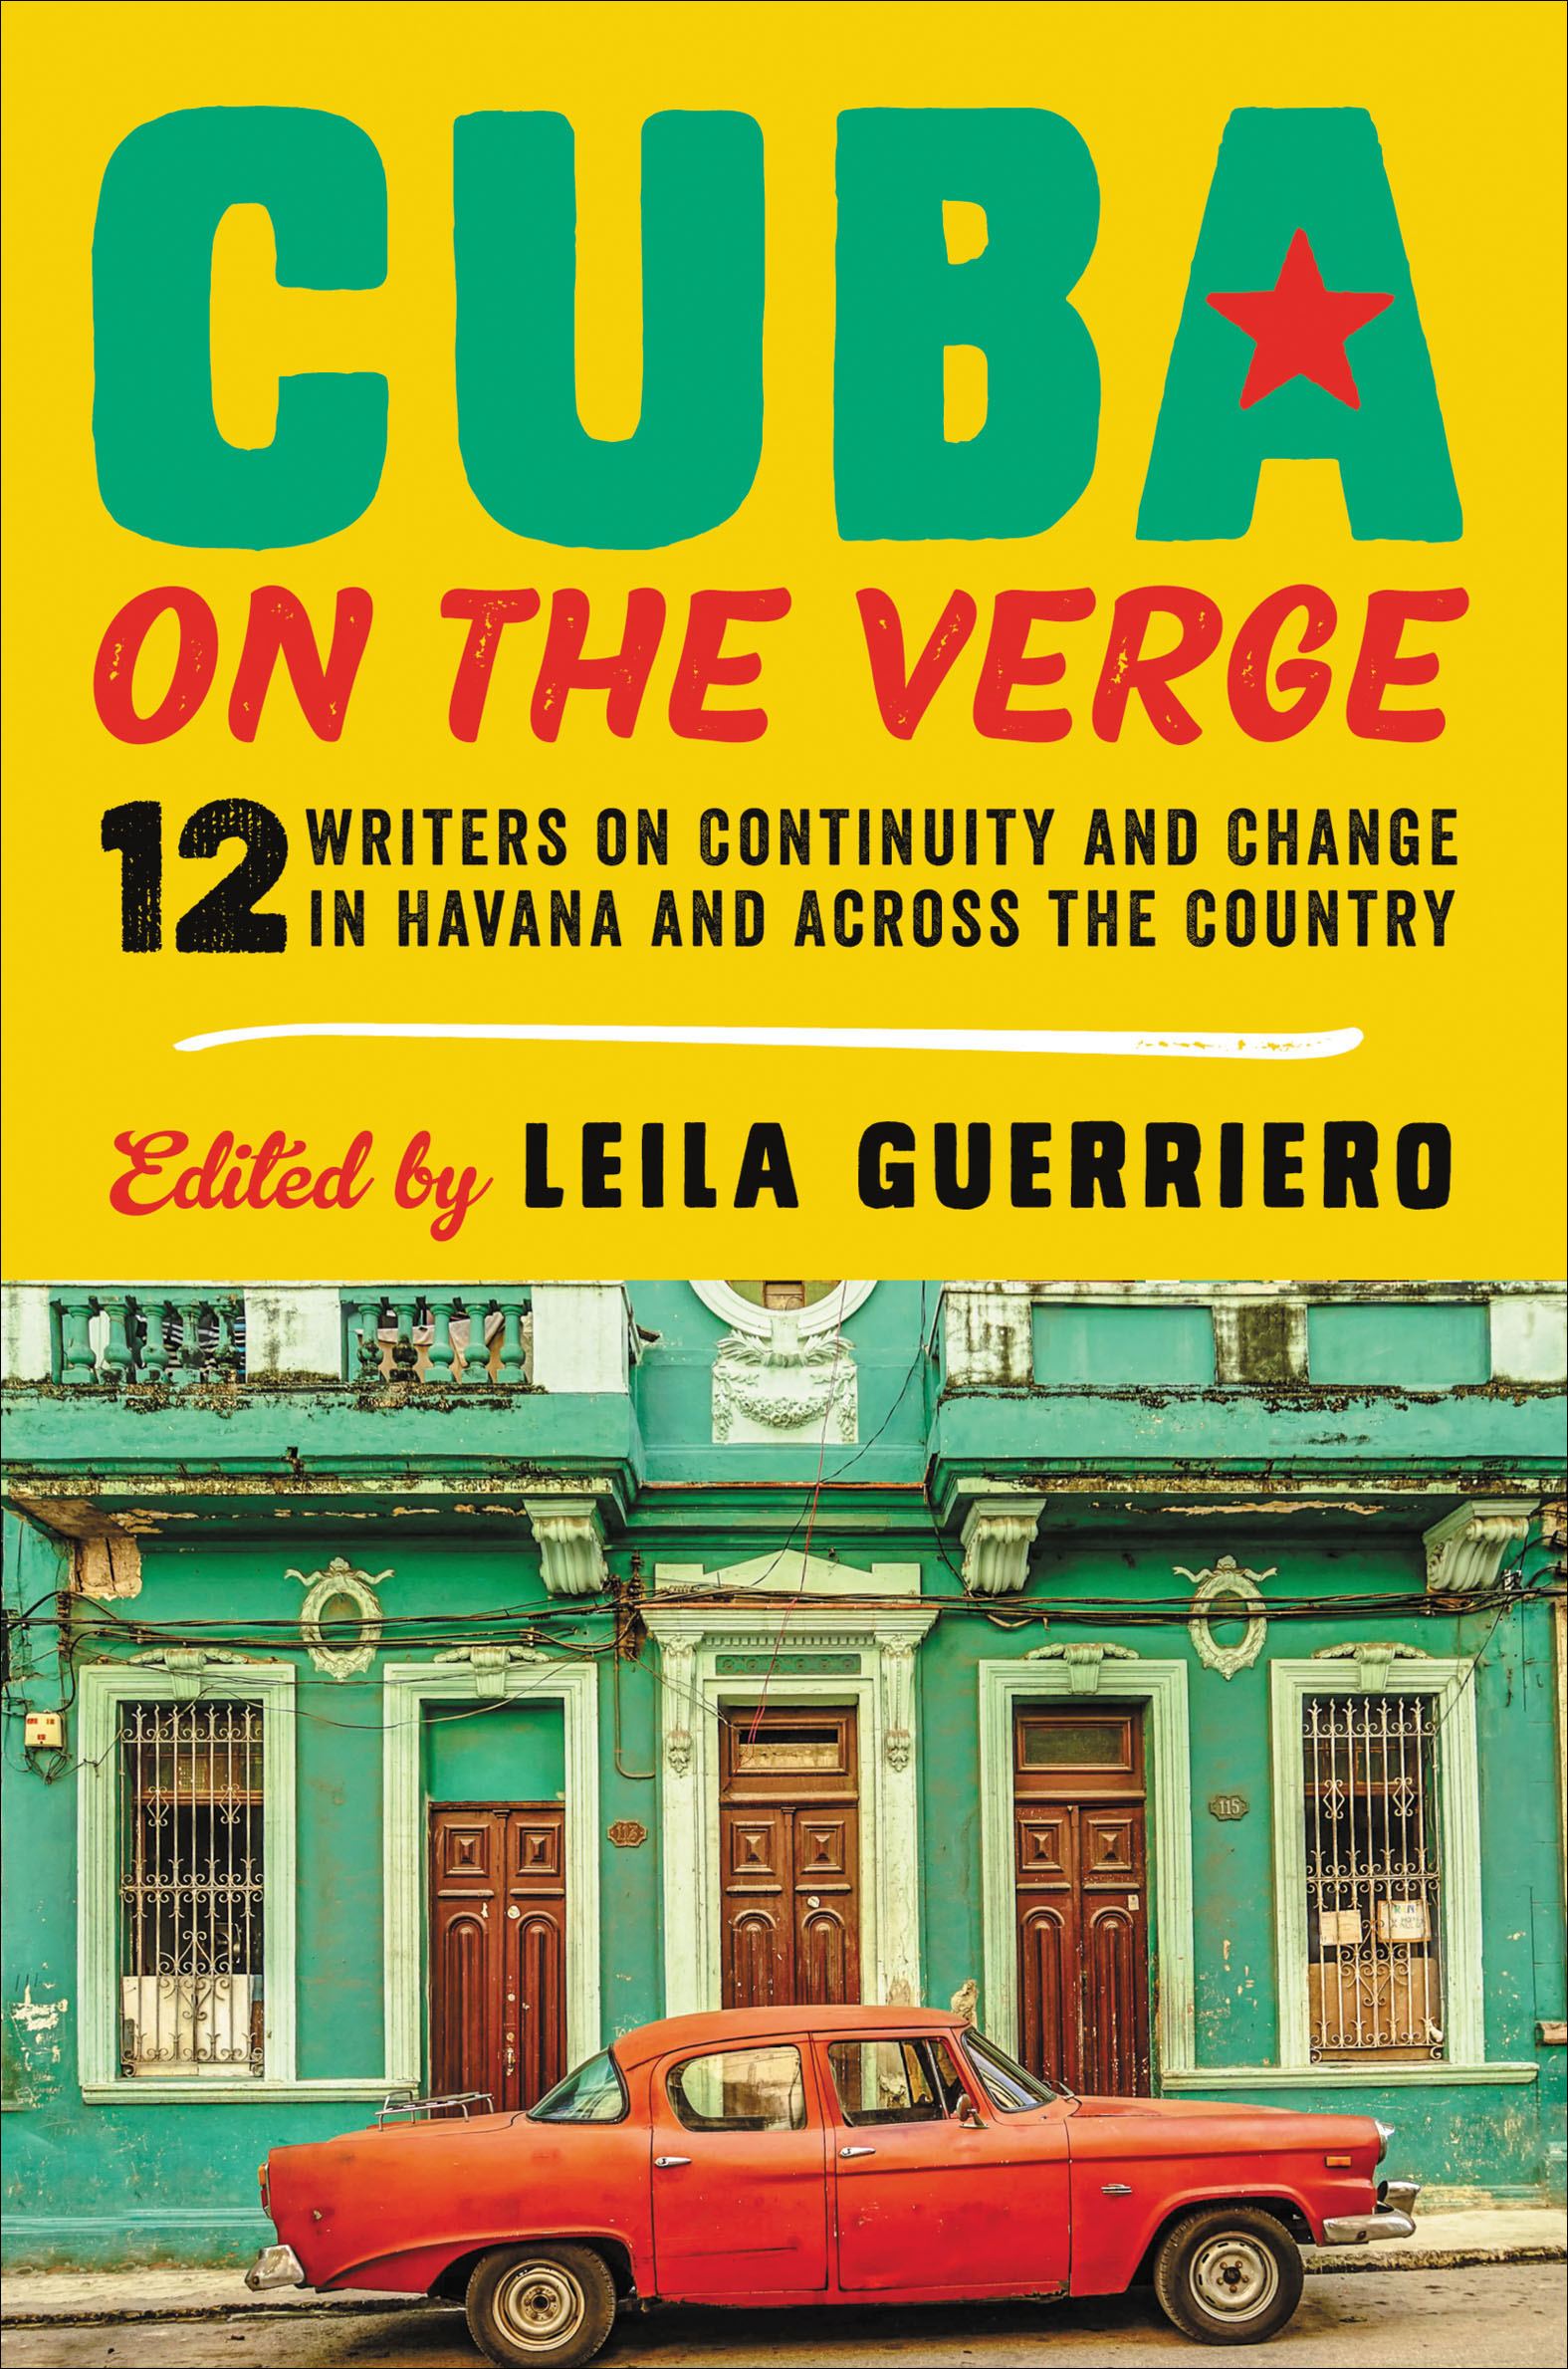 Umschlagbild für Cuba on the Verge [electronic resource] : 12 Writers on Continuity and Change in Havana and Across the Country